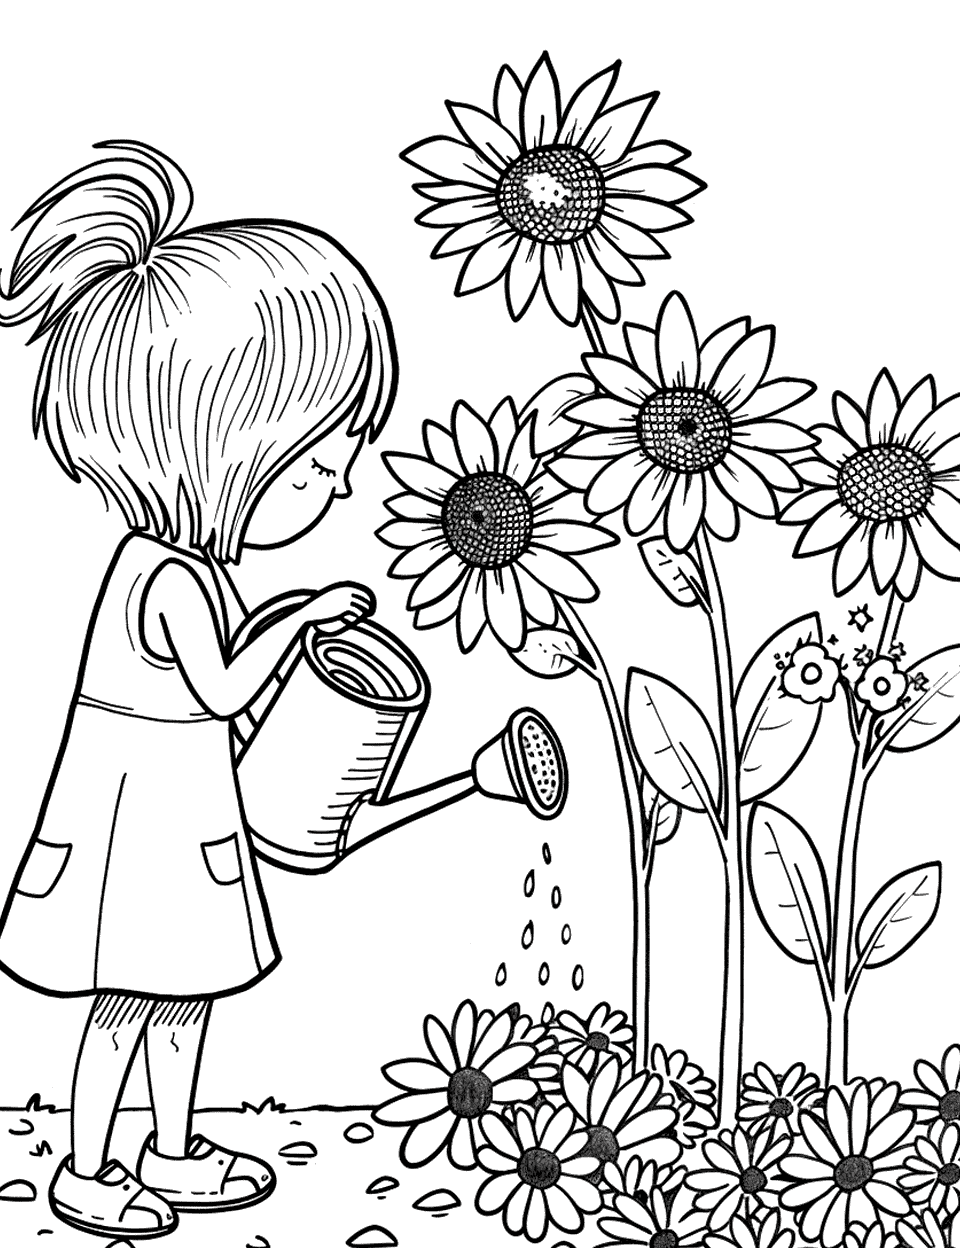 Watering the Garden Coloring Page - A child watering a row of cheerful sunflowers using a large watering can.